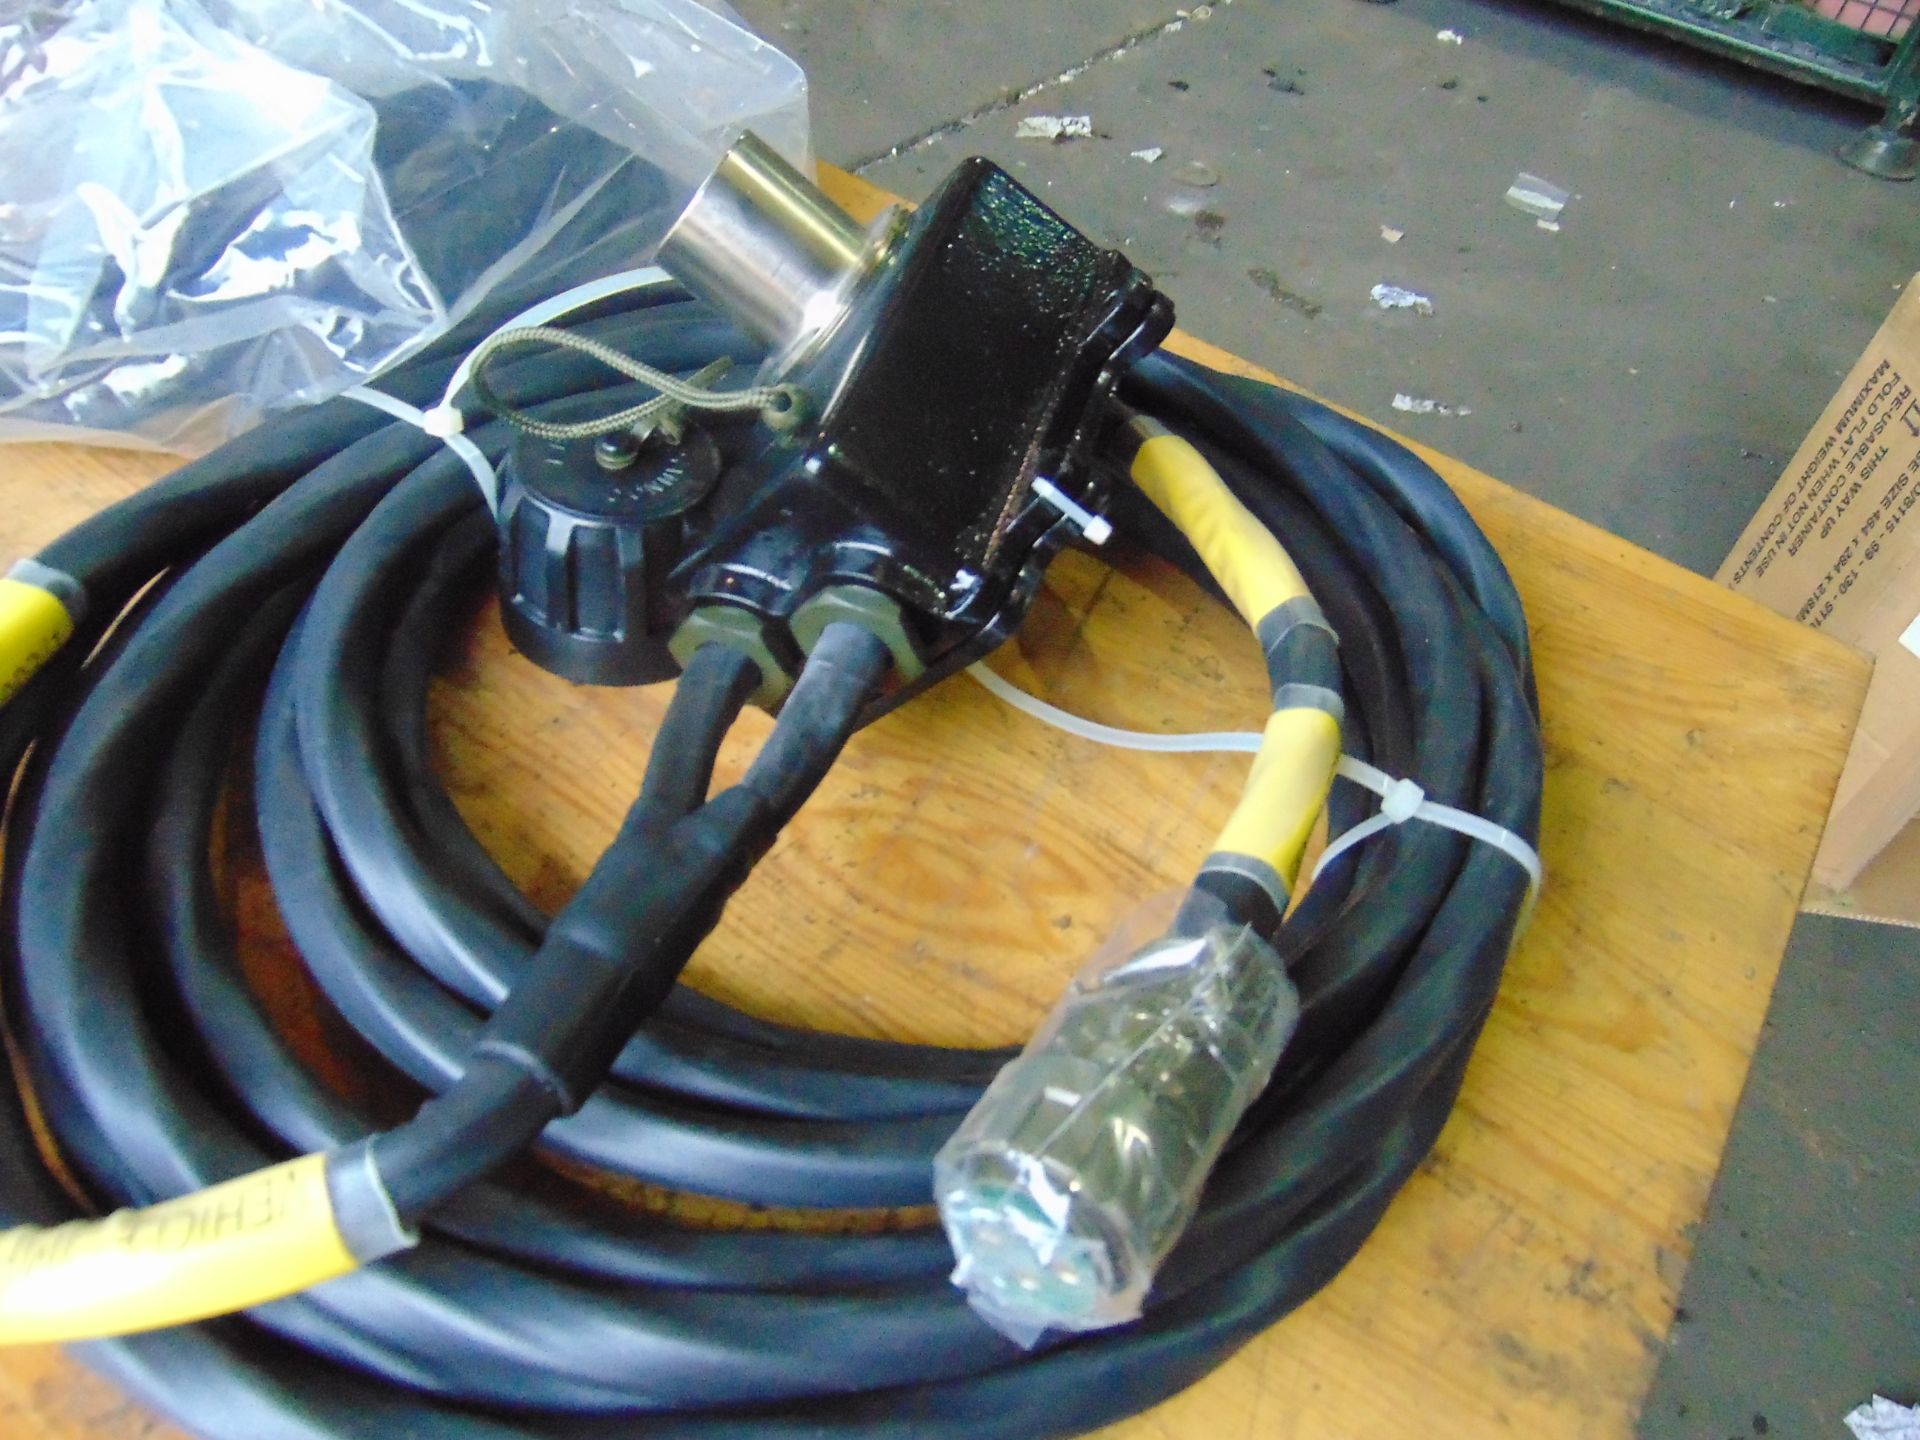 2x New Unissued Vehicle Jump Start Plug and Cable Assembly - Image 2 of 5